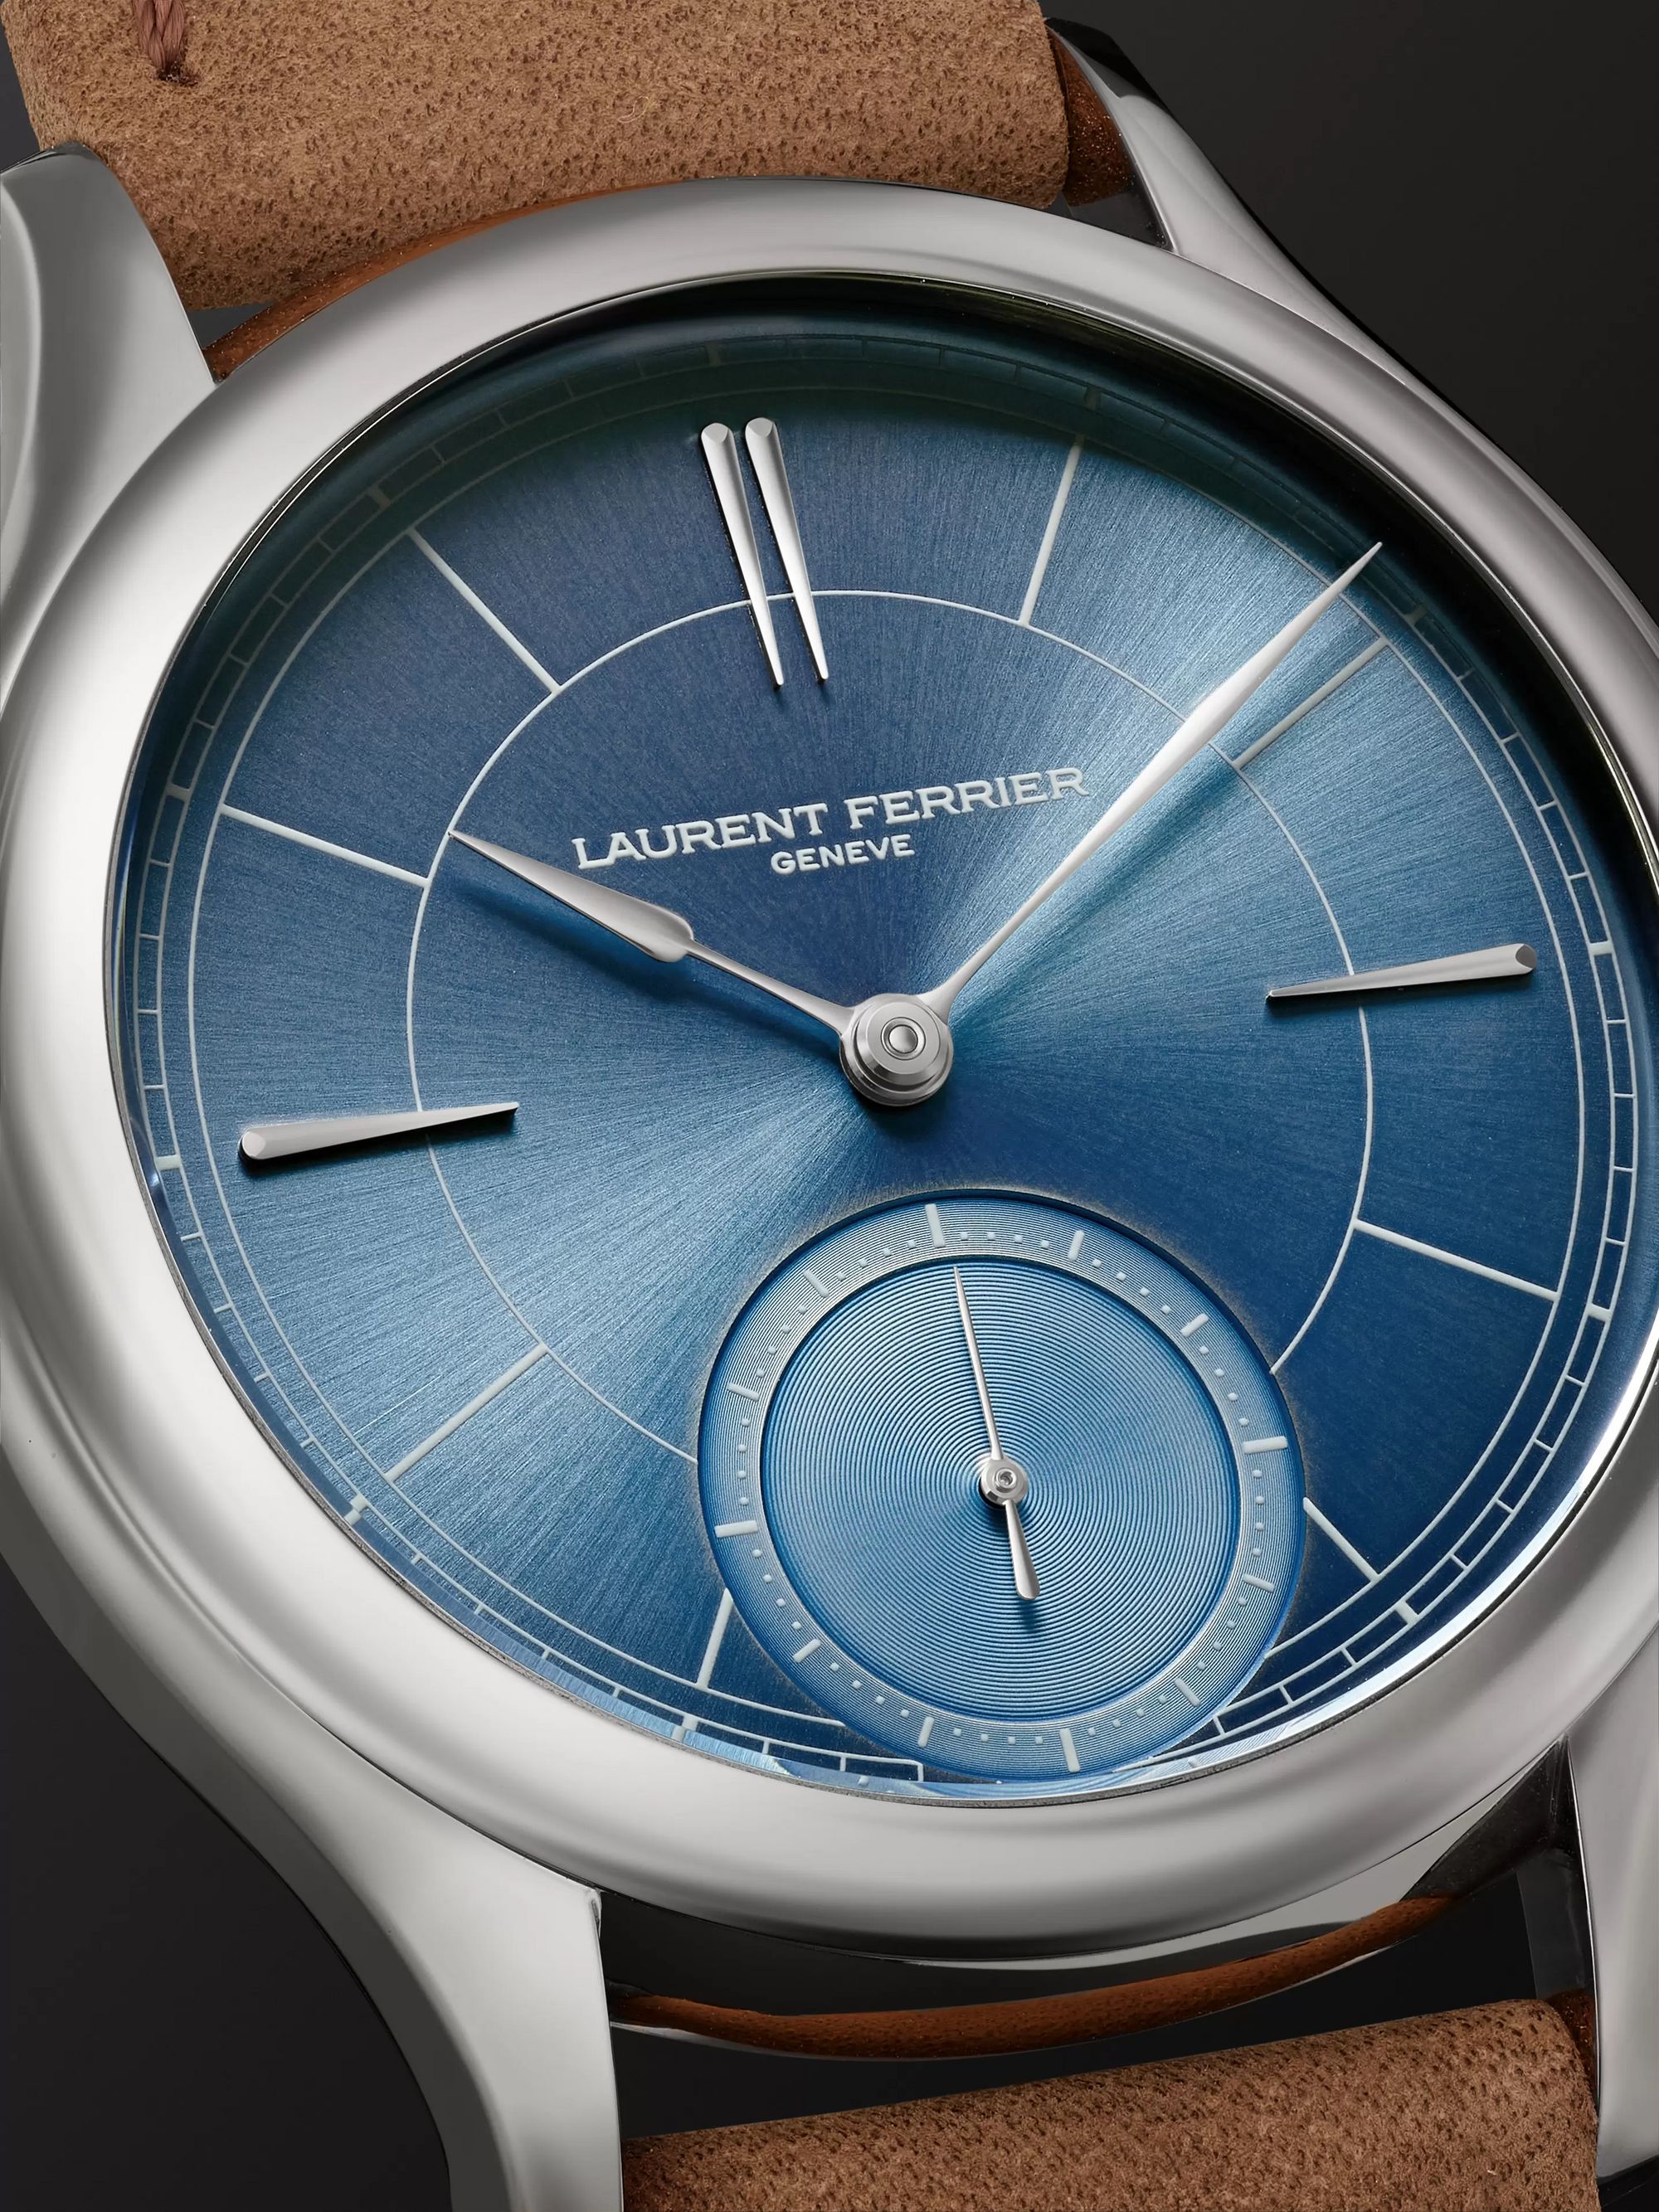 Laurent Ferrier Classic Micro-Rotor Automatic 40mm 18-Karat White Gold and Leather Watch, Ref. No. LCF004.G1.CG7.1